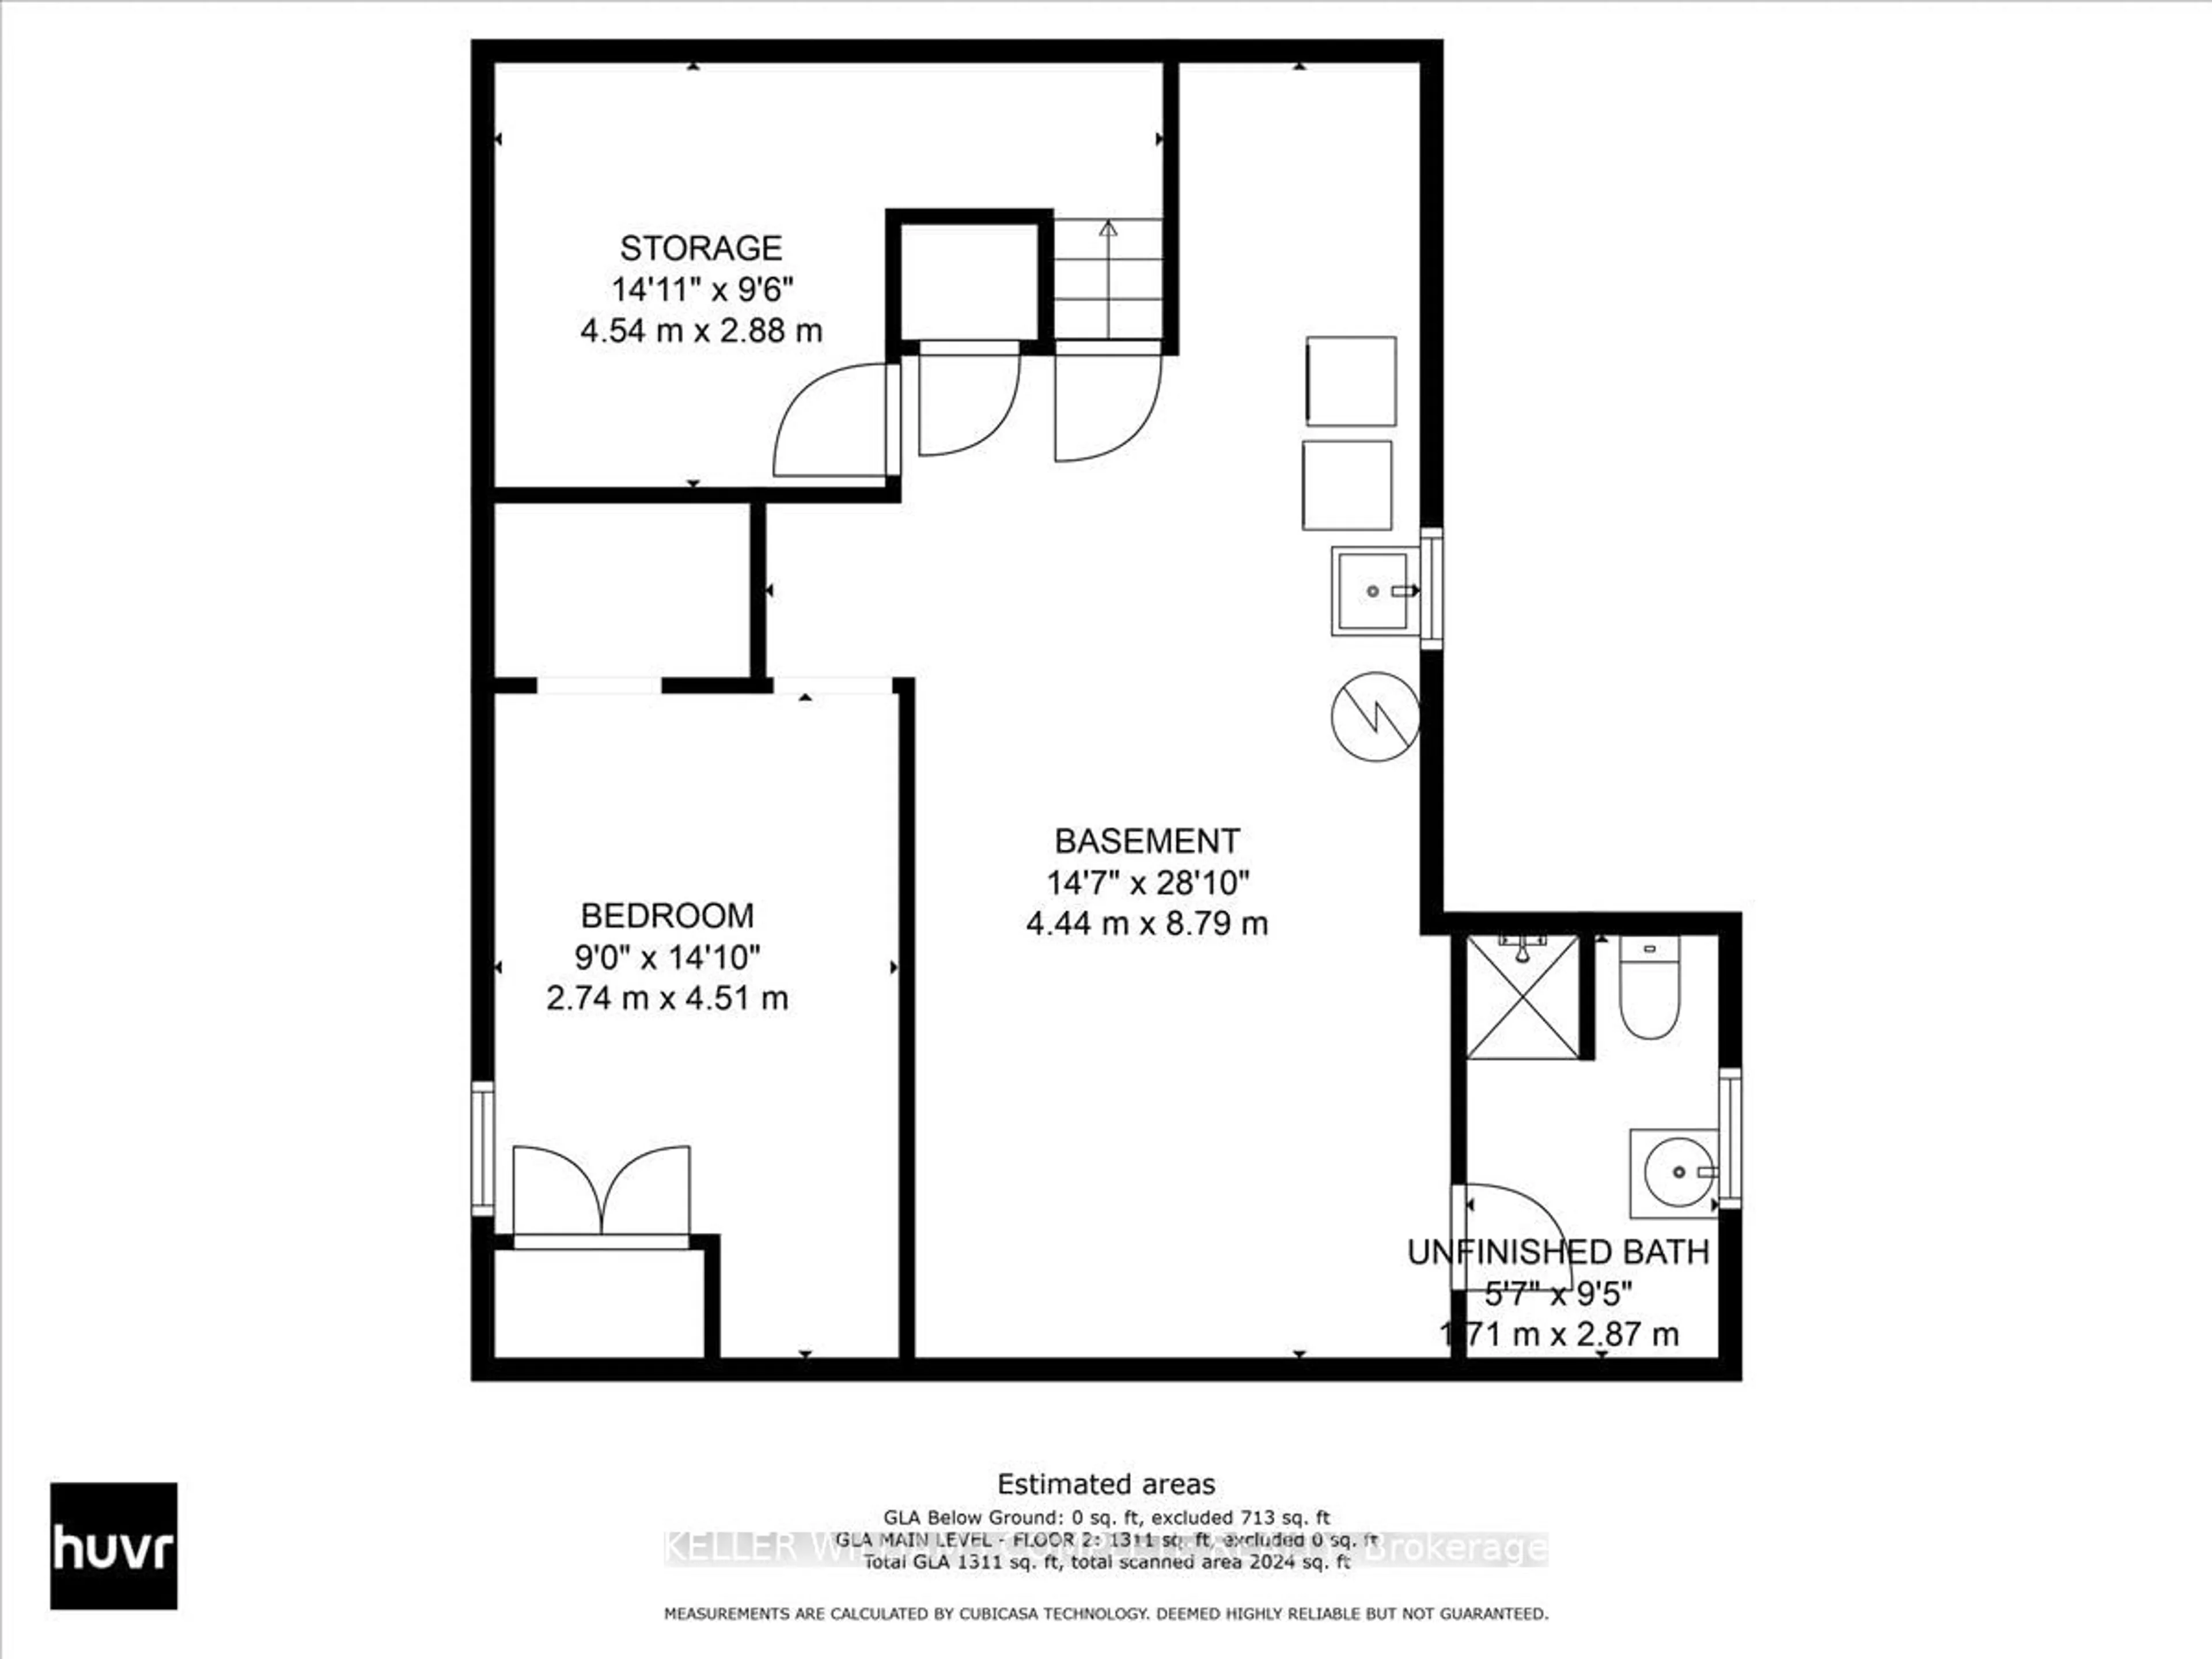 Floor plan for 87 Fairview Rd, Grimsby Ontario L3M 3L6